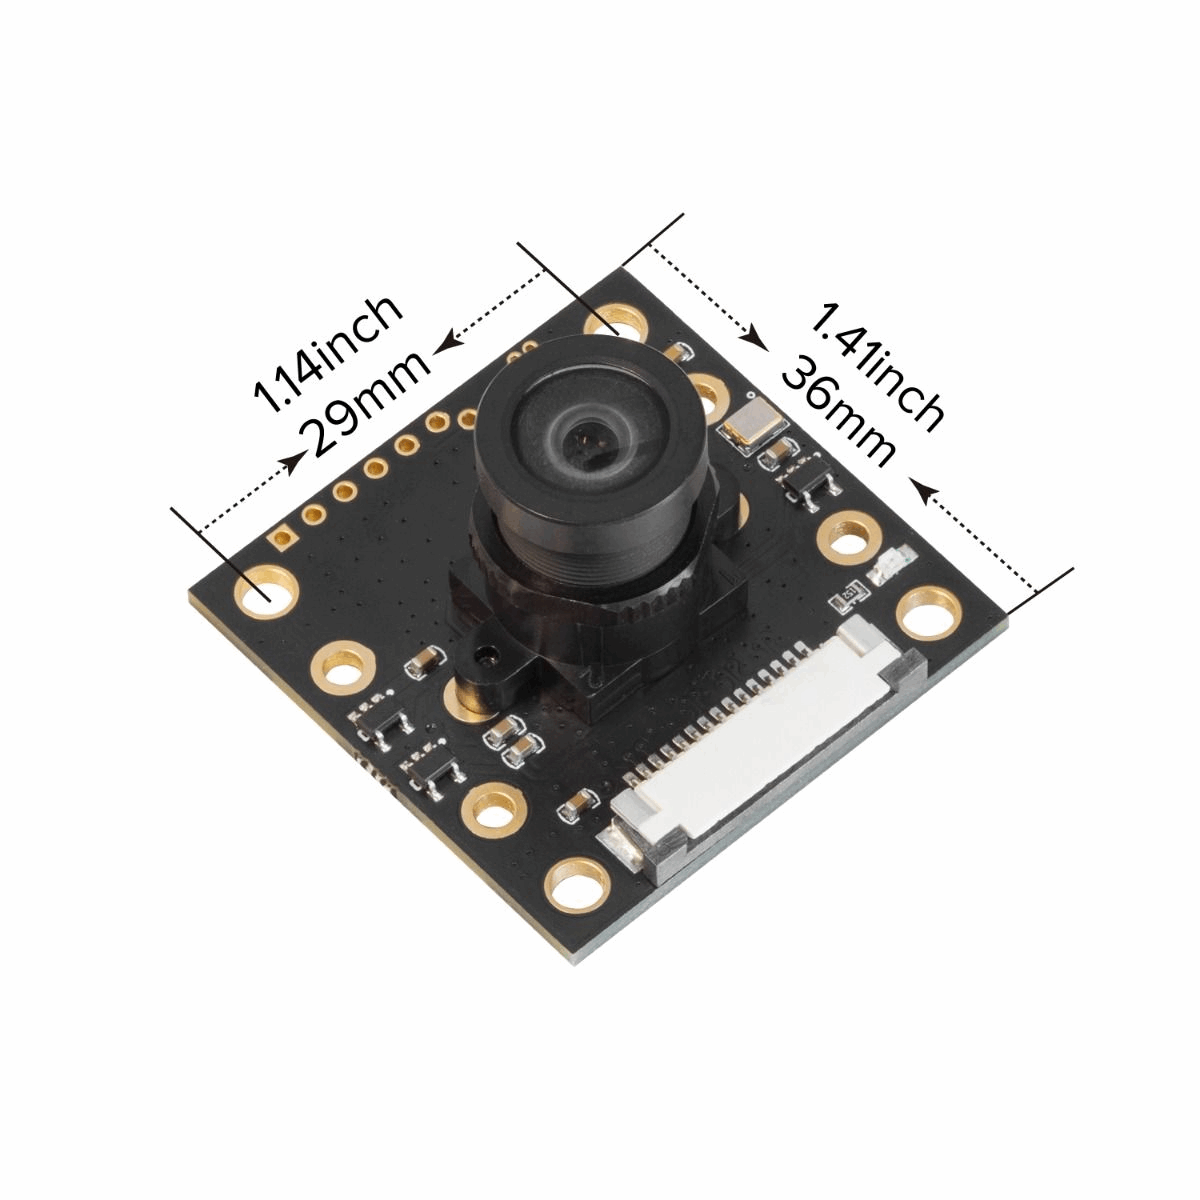 image of the b0035 camera module for raspberry pi with dimensions